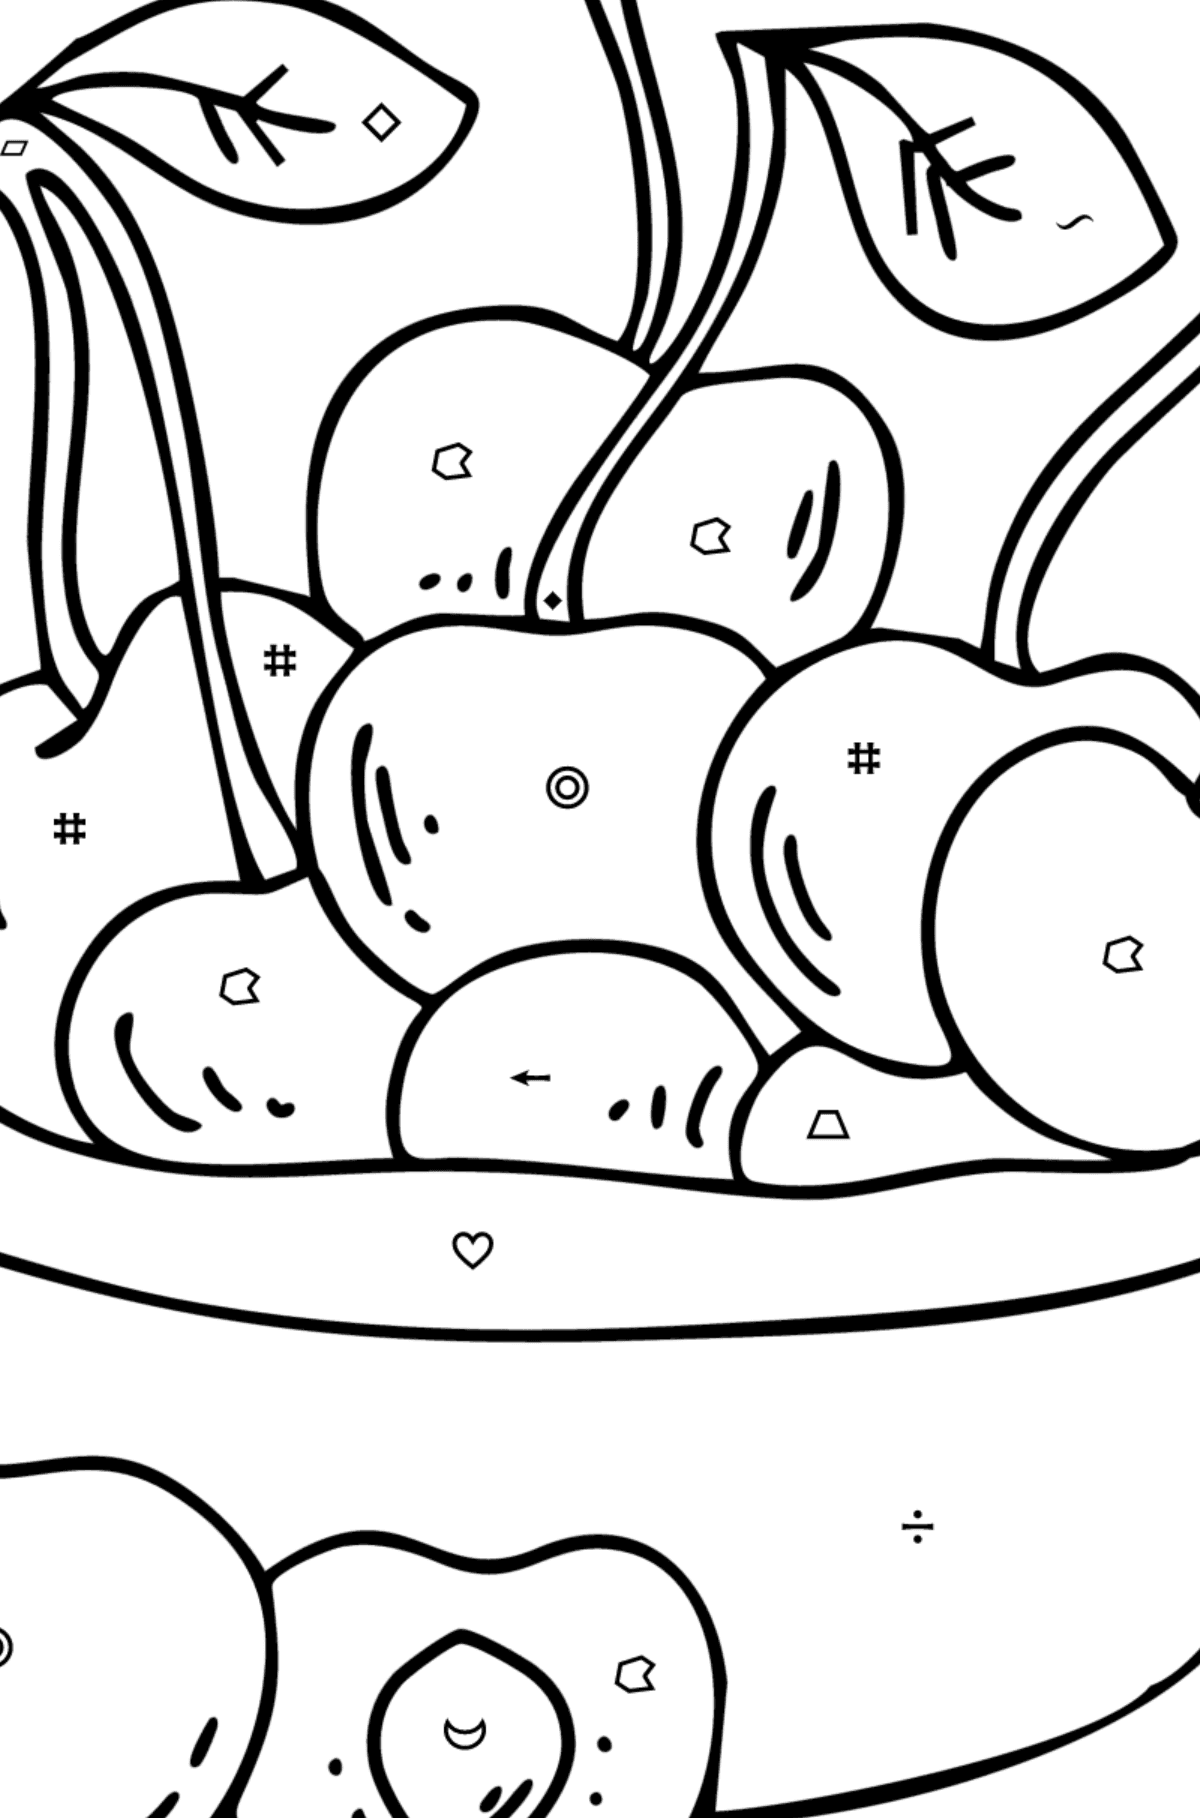 Cherries Plate Coloring Page - Coloring by Symbols and Geometric Shapes for Kids